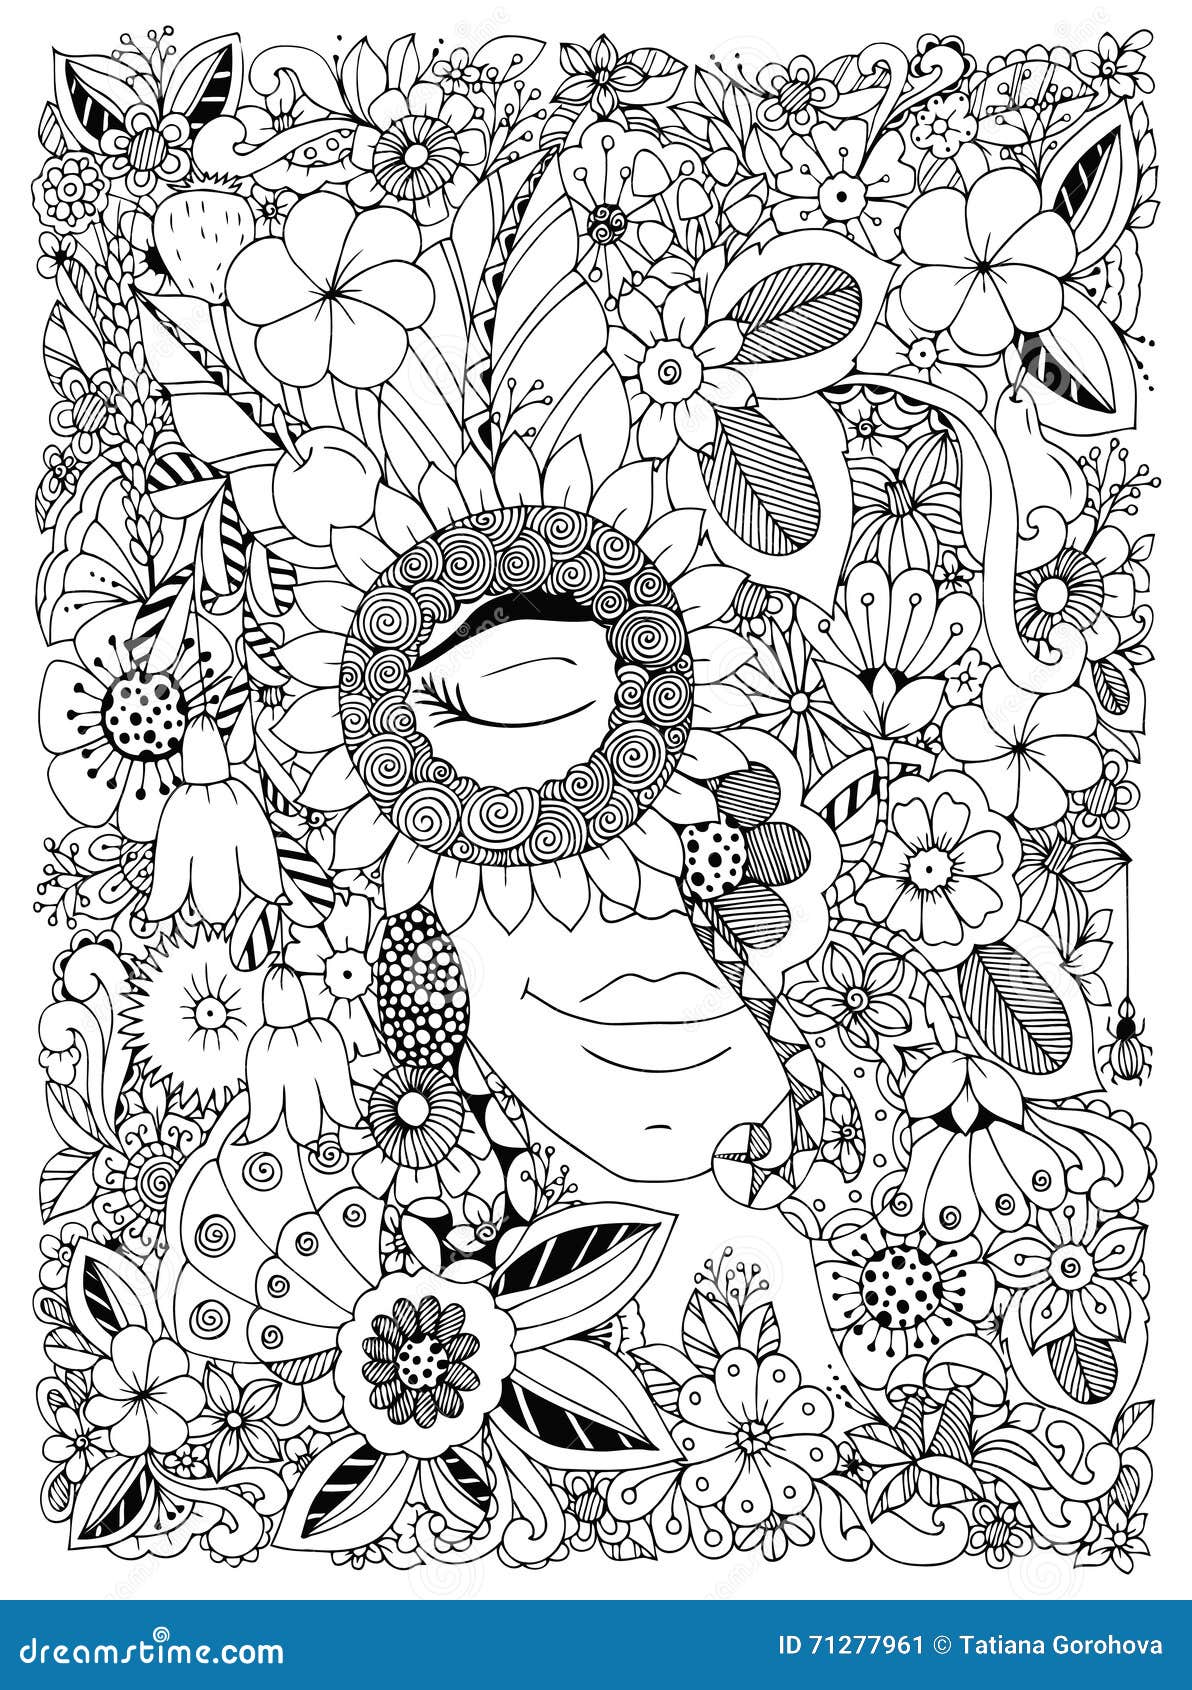   zen tangle portrait of a woman in a flower frame. doodle flowers, forest, garden. coloring book anti stress